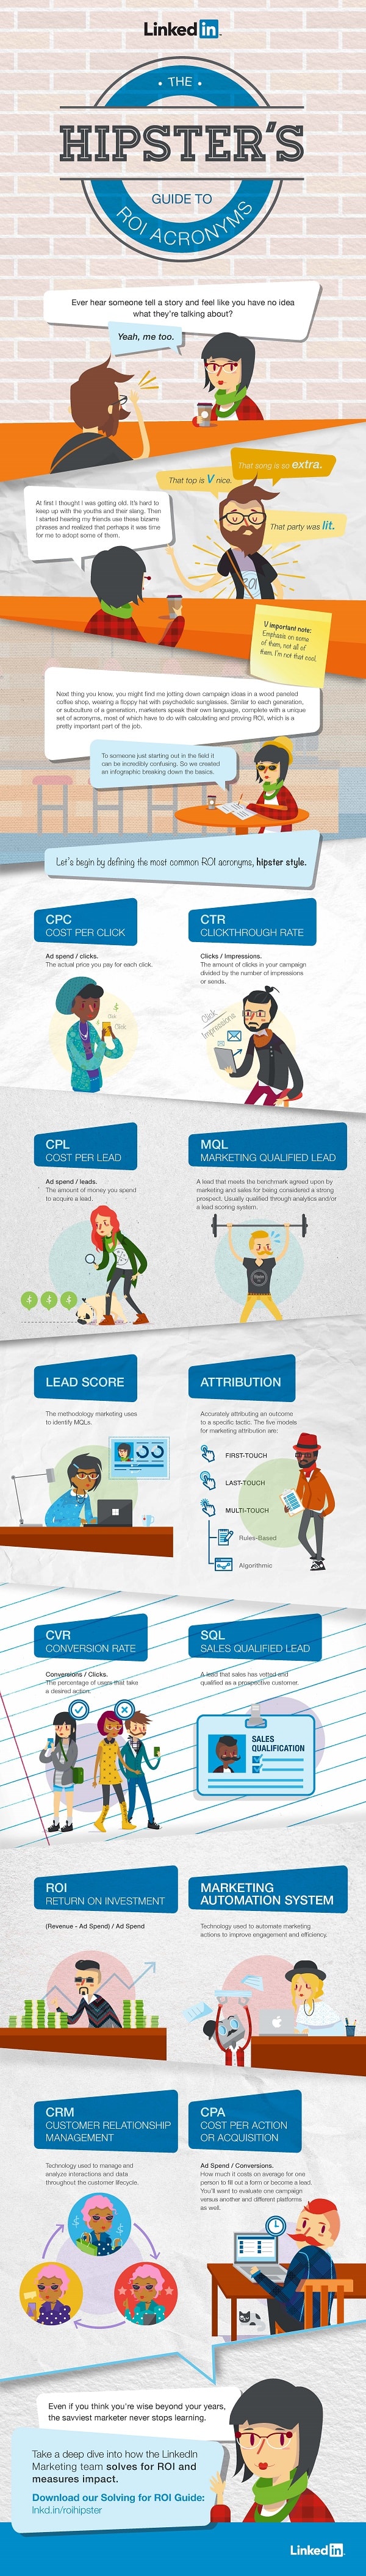 Hipsters guide to ROI infographic